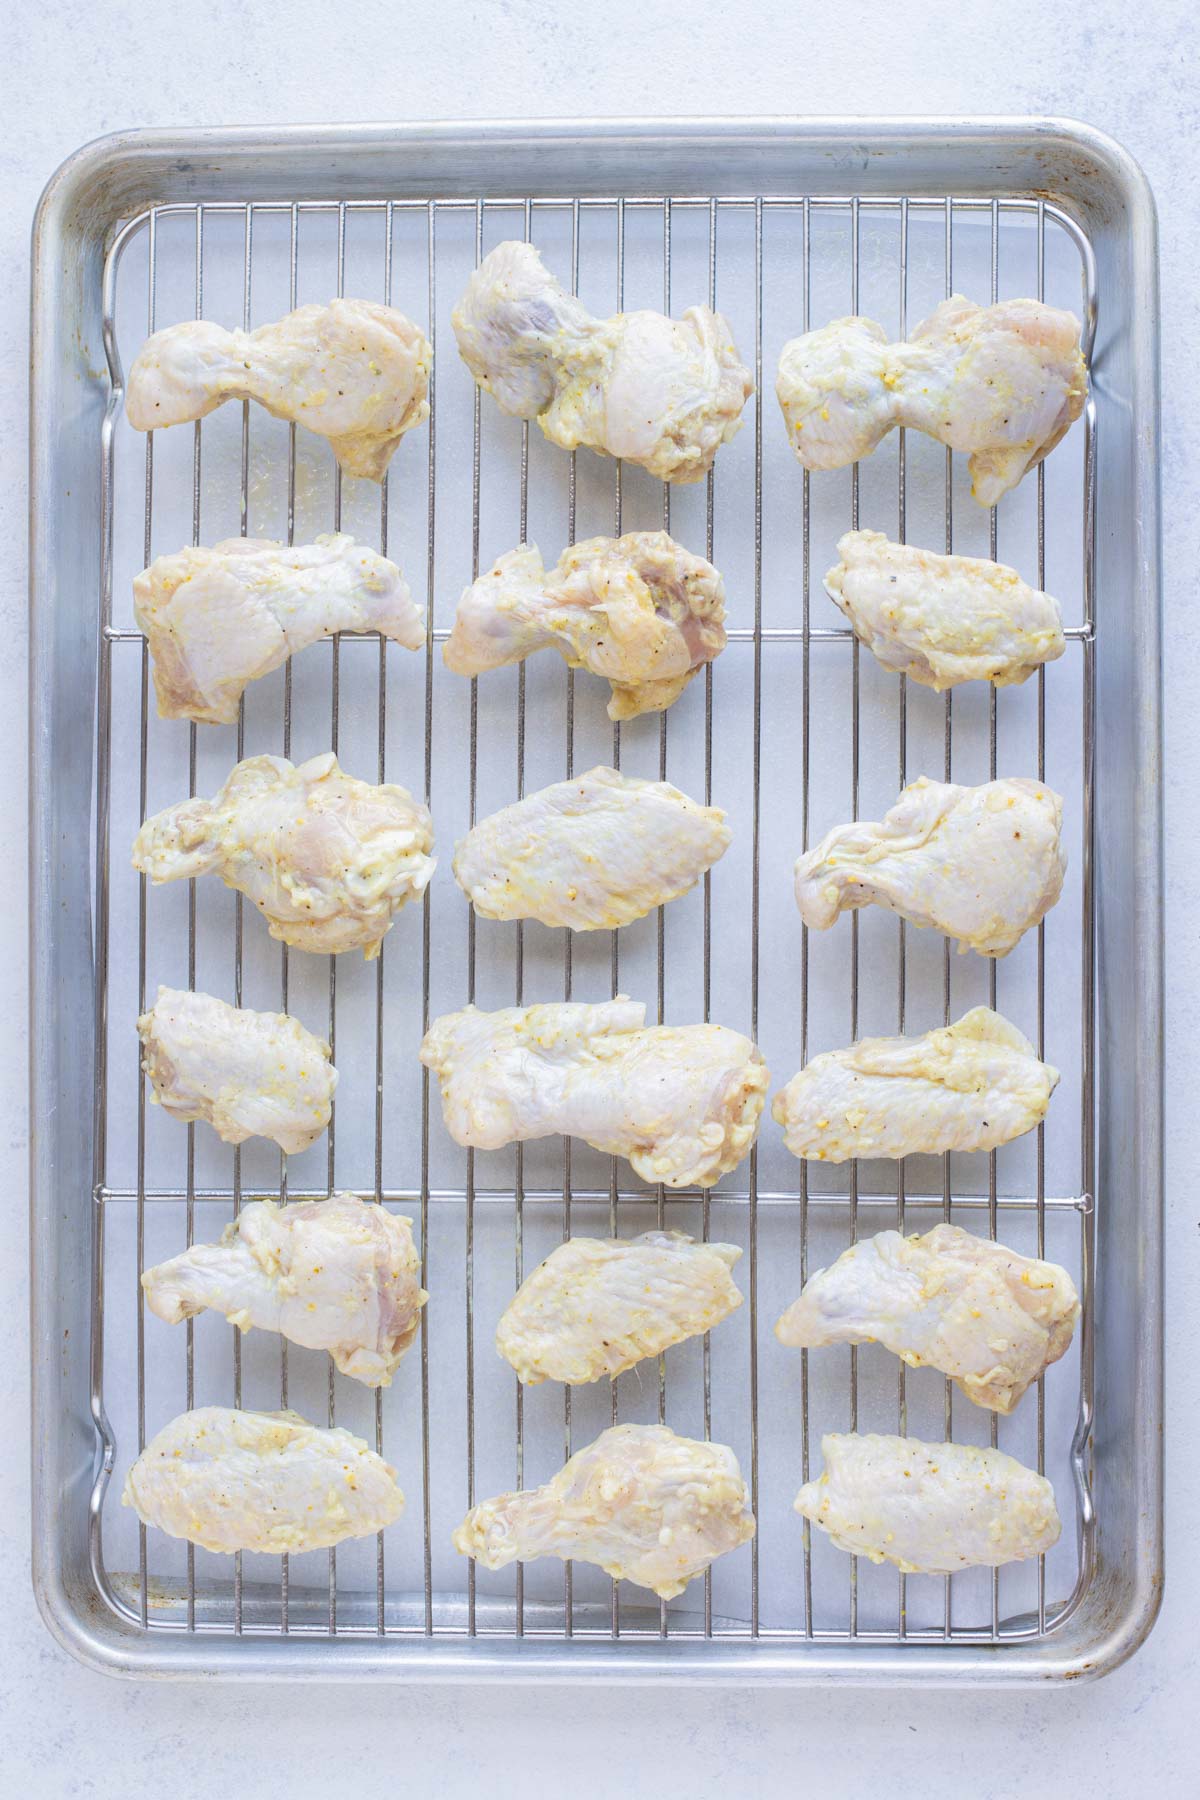 A wire rack is used on the baking sheet before putting in the oven.